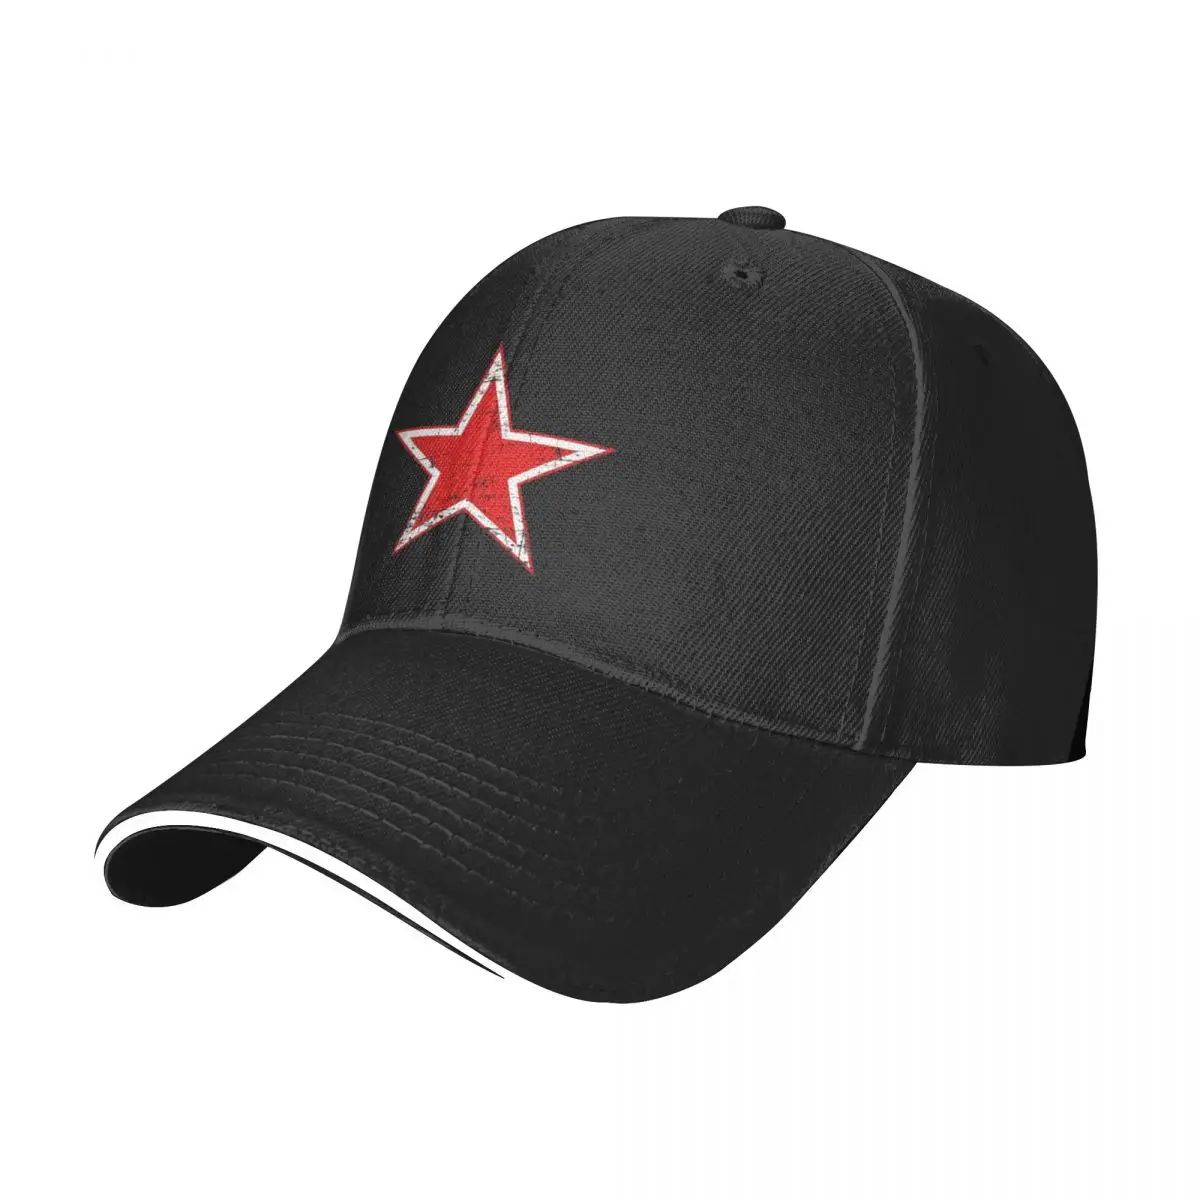 

Red Five-pointed Star Adjustable Baseball Cap For Women Printing High-end Snapback Caps Mens Hip Hop Street Tide Sunscreen Hats